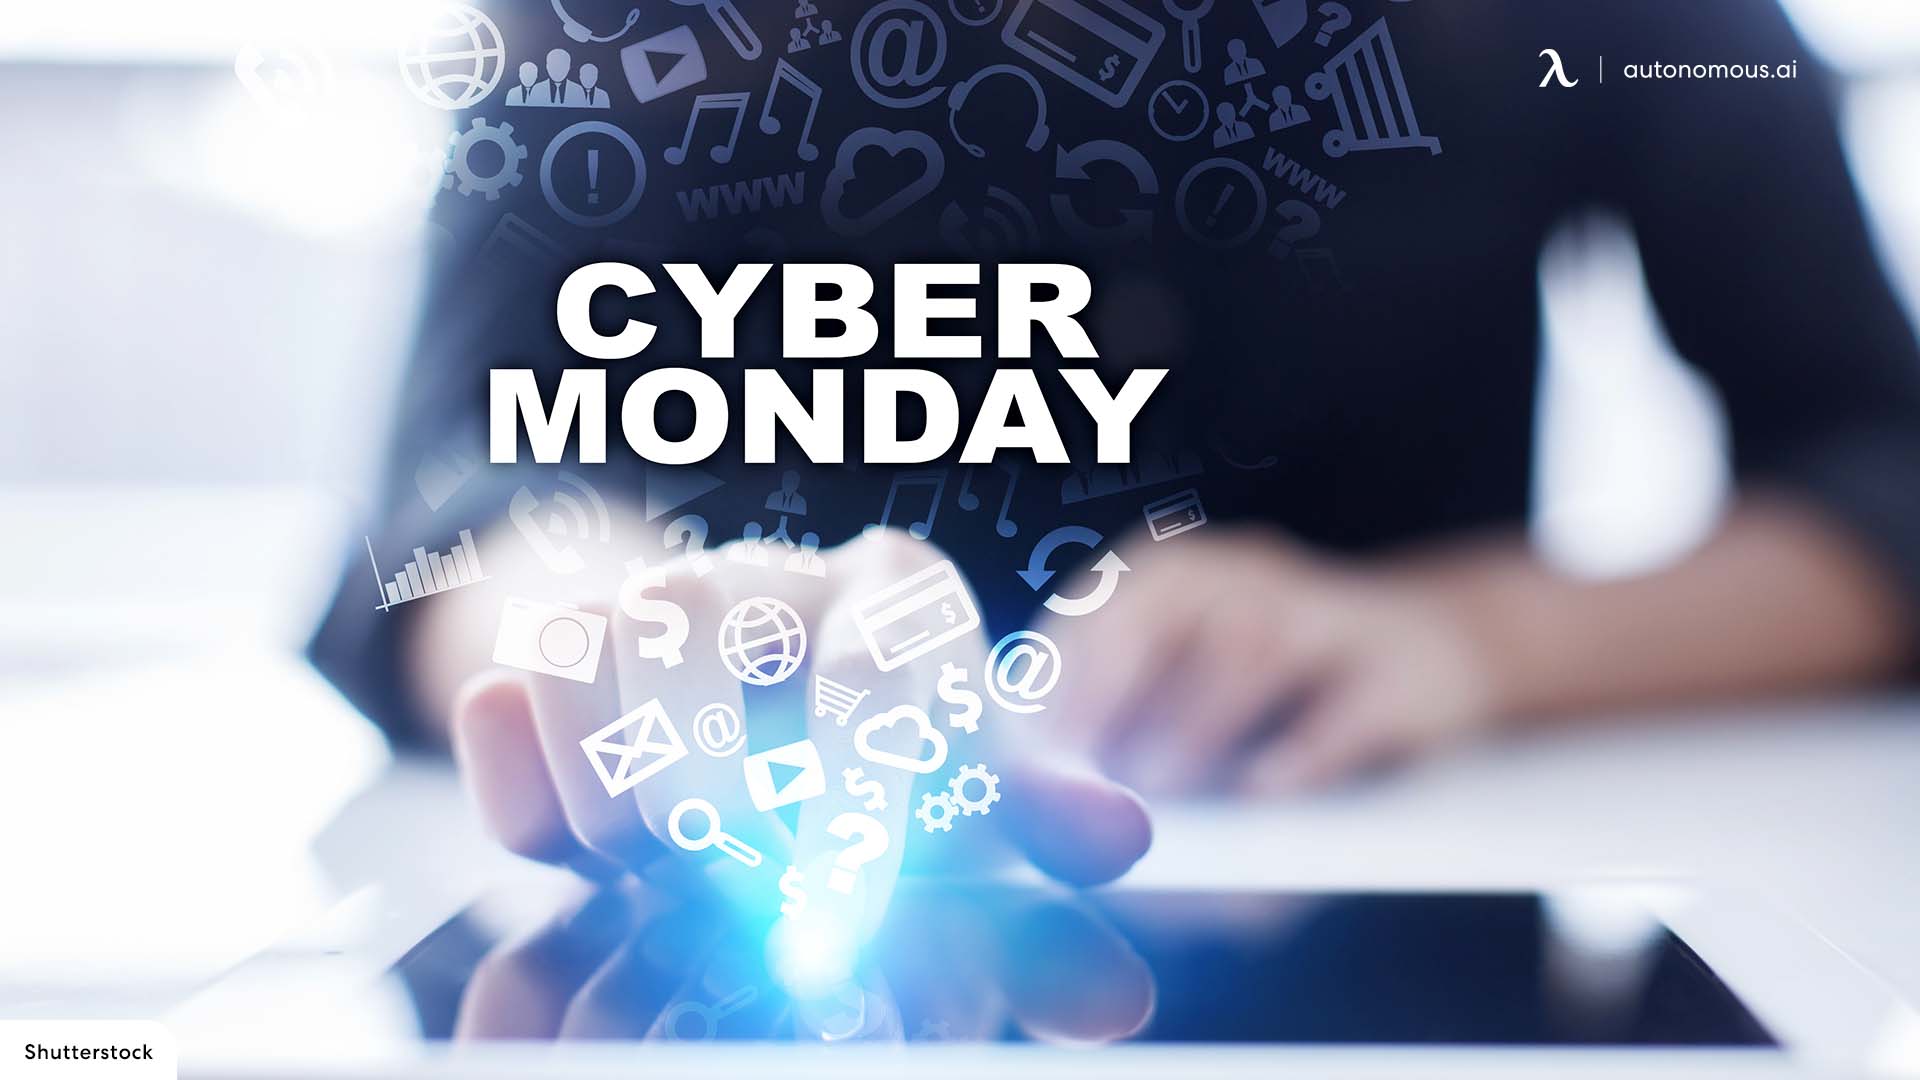 Cyber Monday Deals 2021: Top Best Seller Products